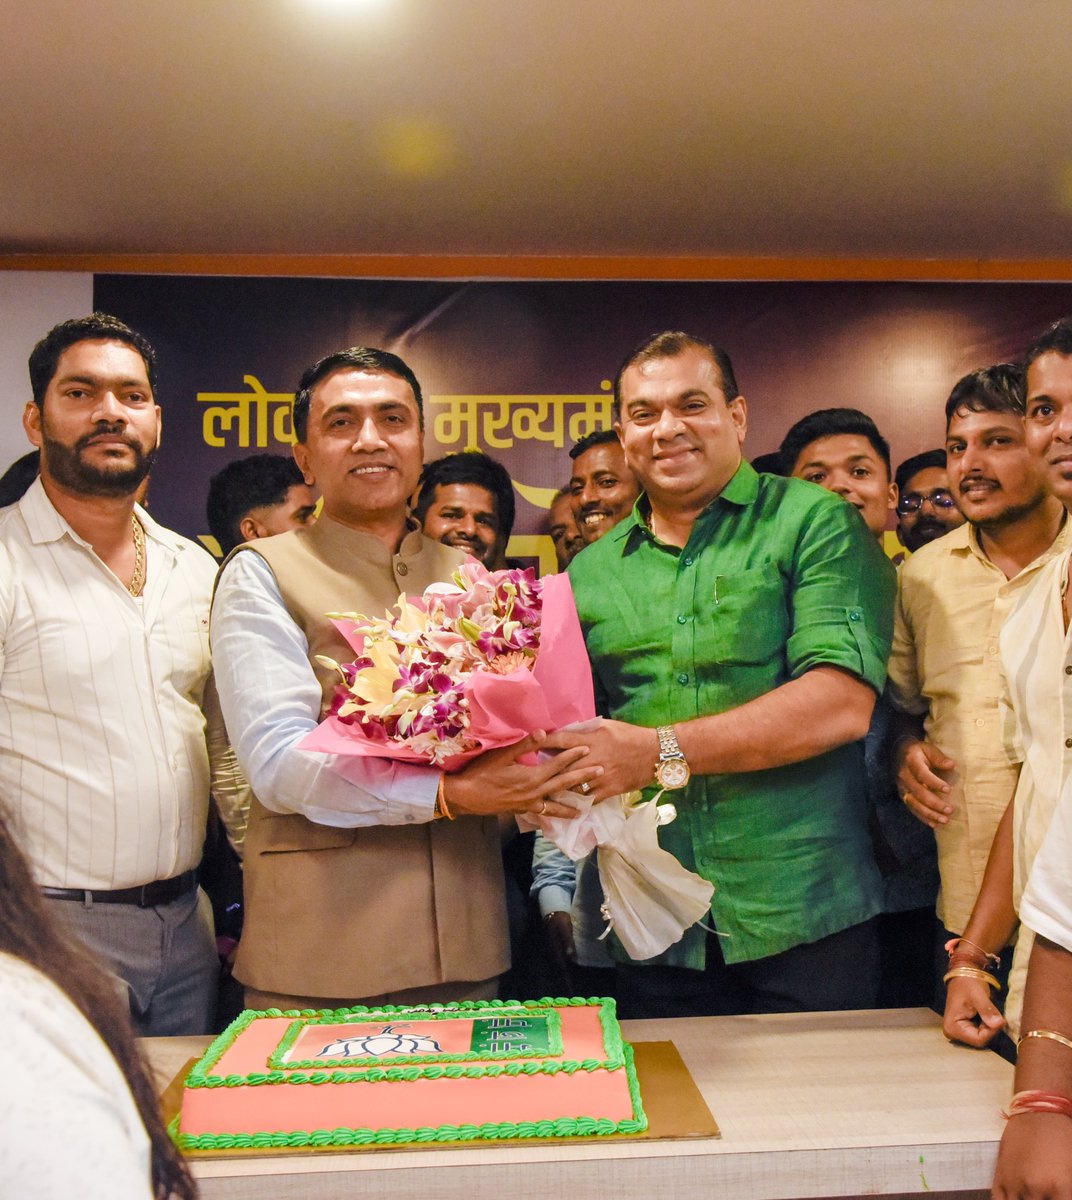 Conveyed My Personal Greeting’s to Our Hon’ble CM @DrPramodPSawant on His 51st Birthday and Wished Him Good Health & Greater Success in Leading Goa.